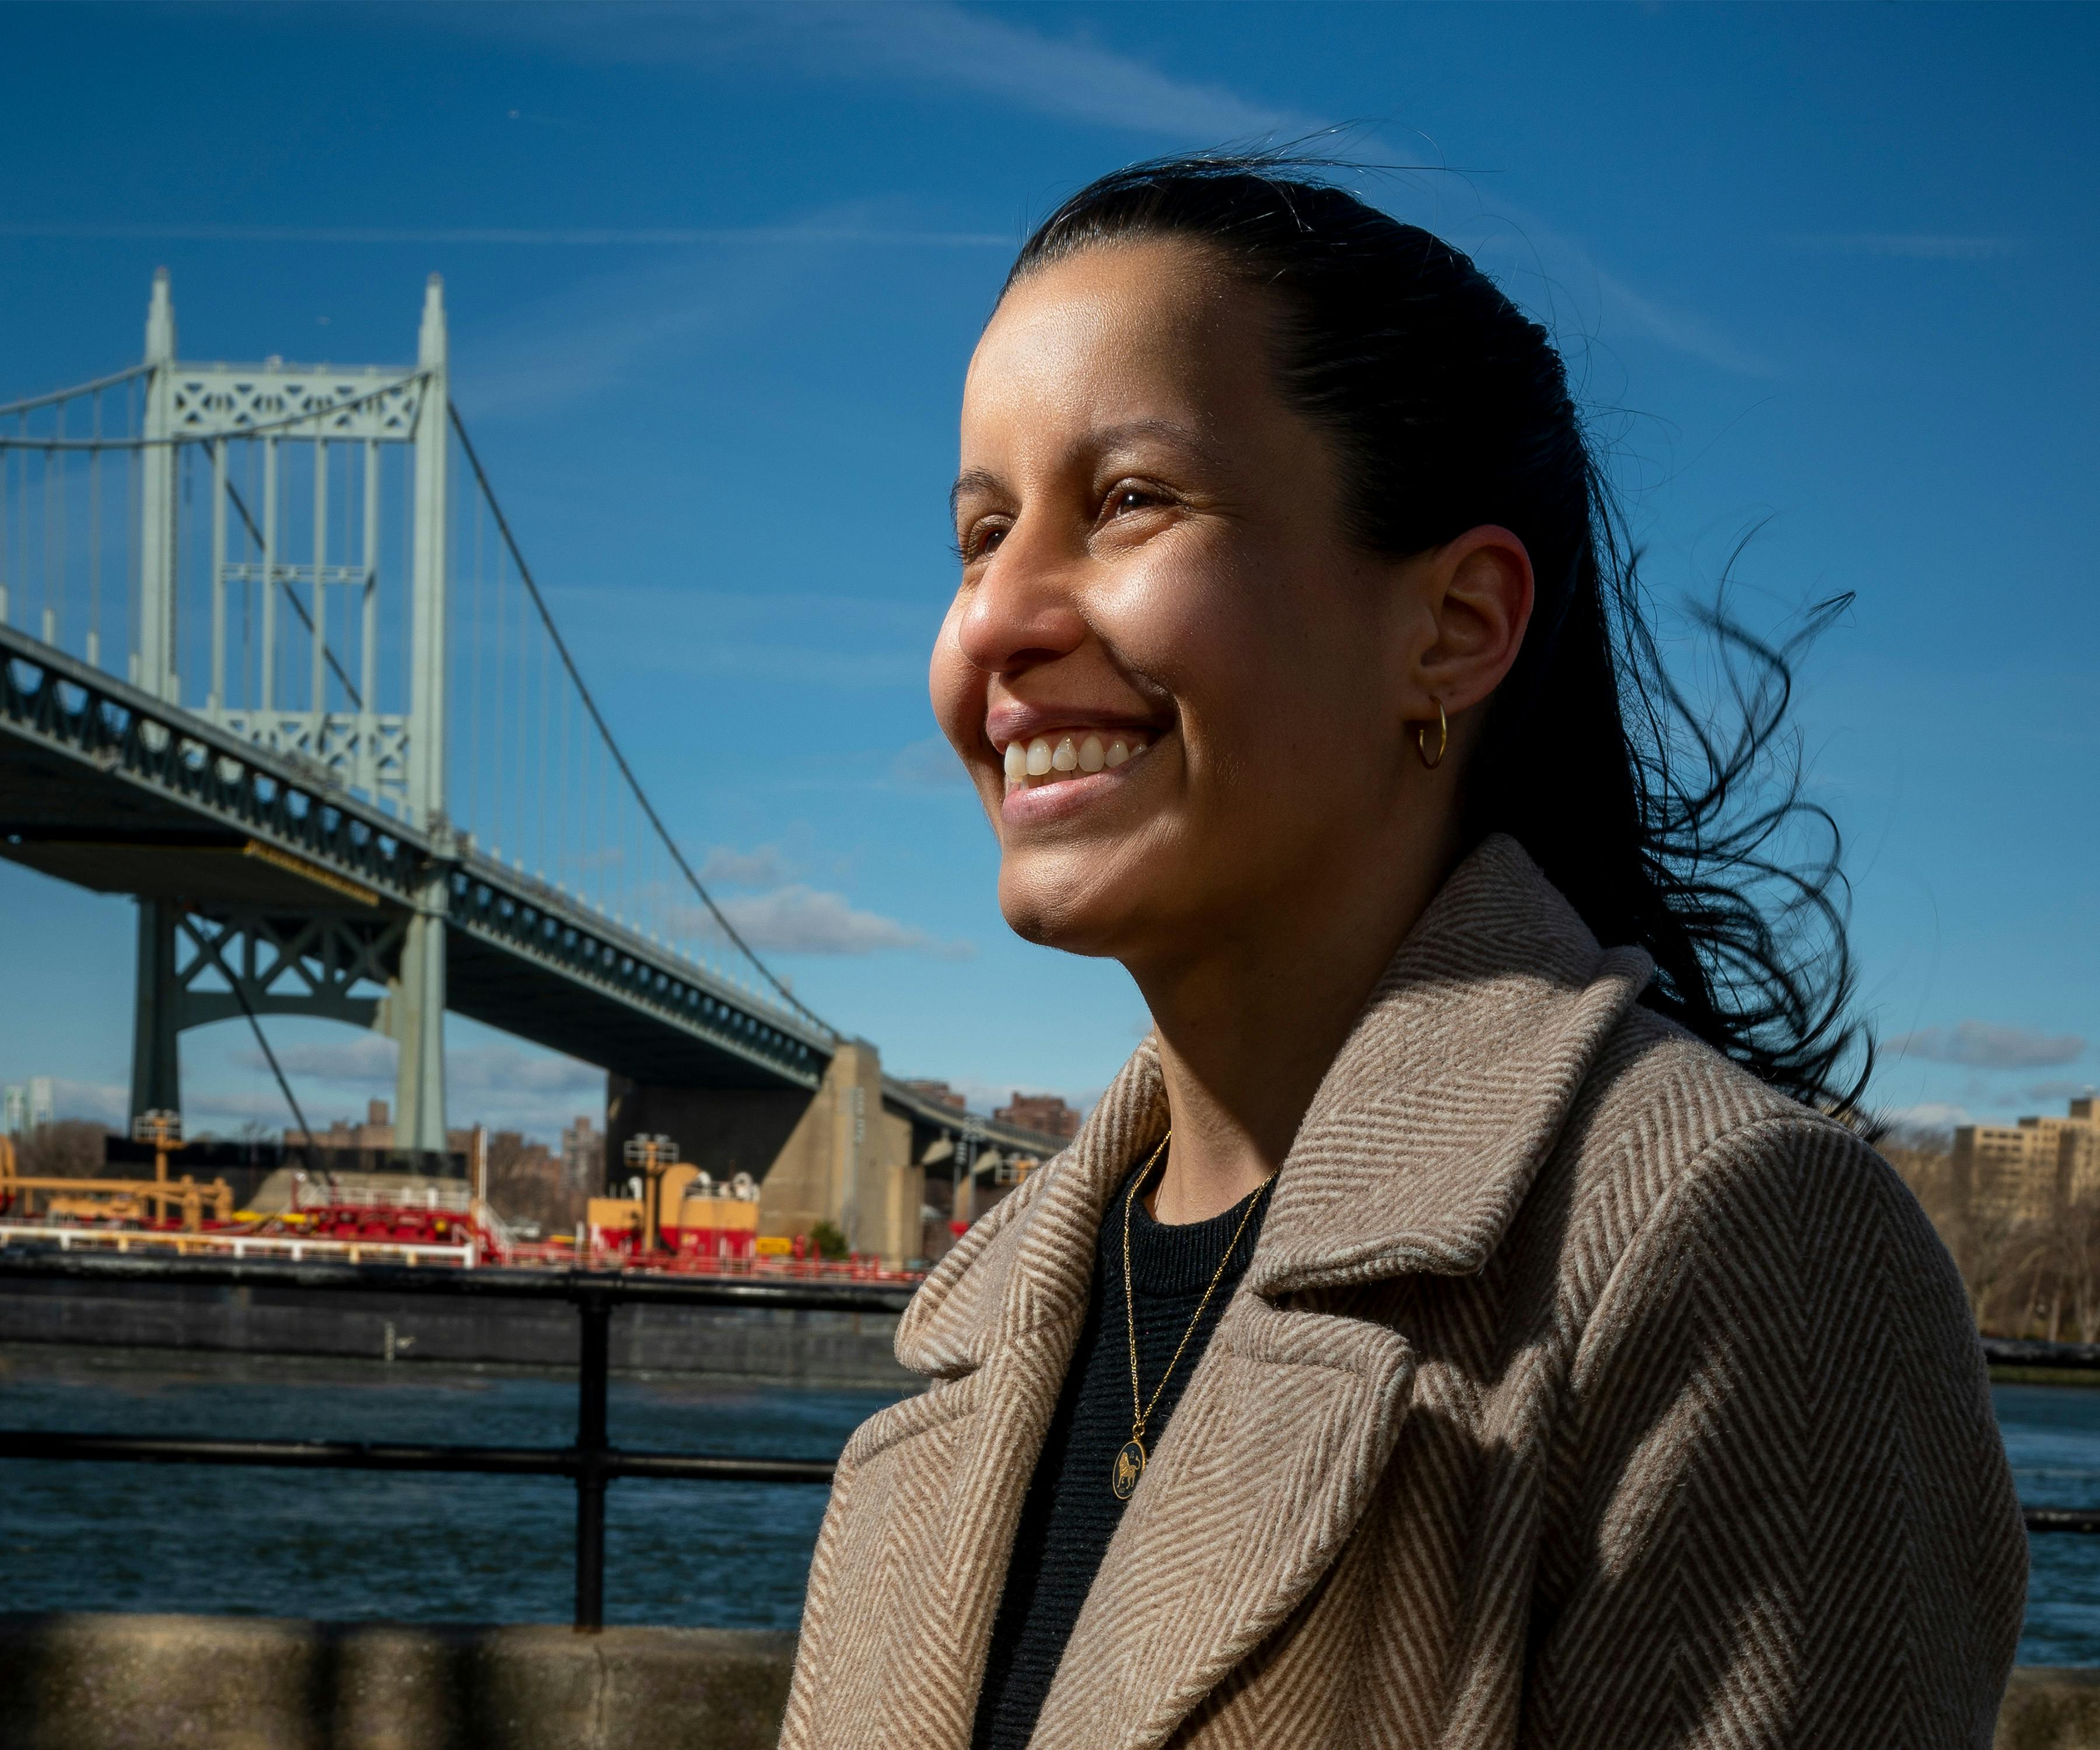 NYC council member Tiffany Cabán standing outside against the backdrop of the Queensboro bridge